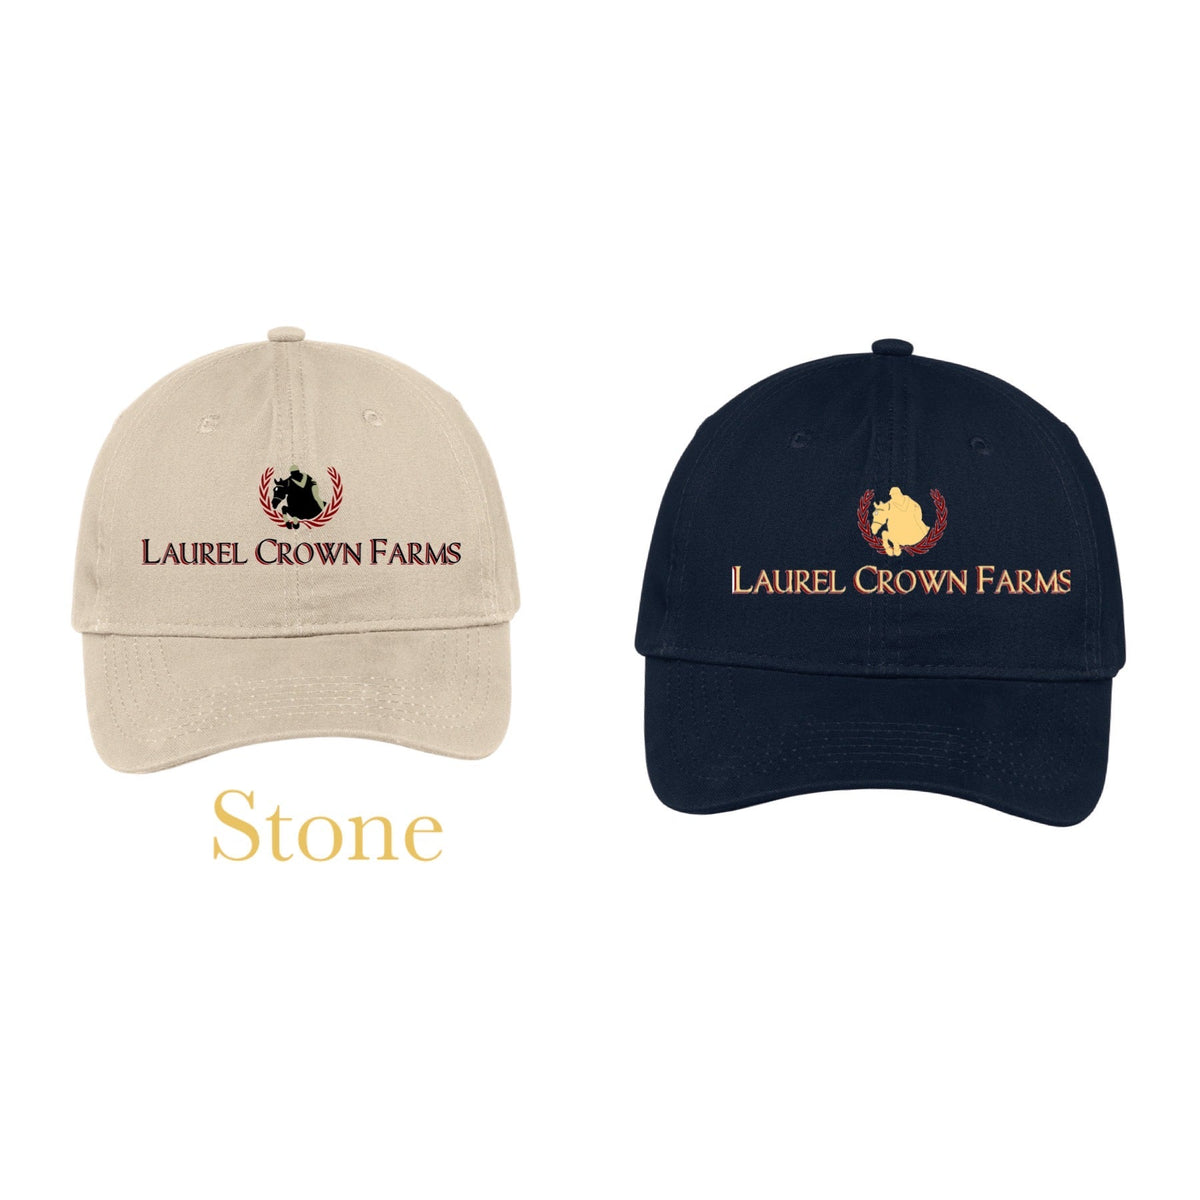 Equestrian Team Apparel Laurel Crown Farms Baseball Cap equestrian team apparel online tack store mobile tack store custom farm apparel custom show stable clothing equestrian lifestyle horse show clothing riding clothes horses equestrian tack store